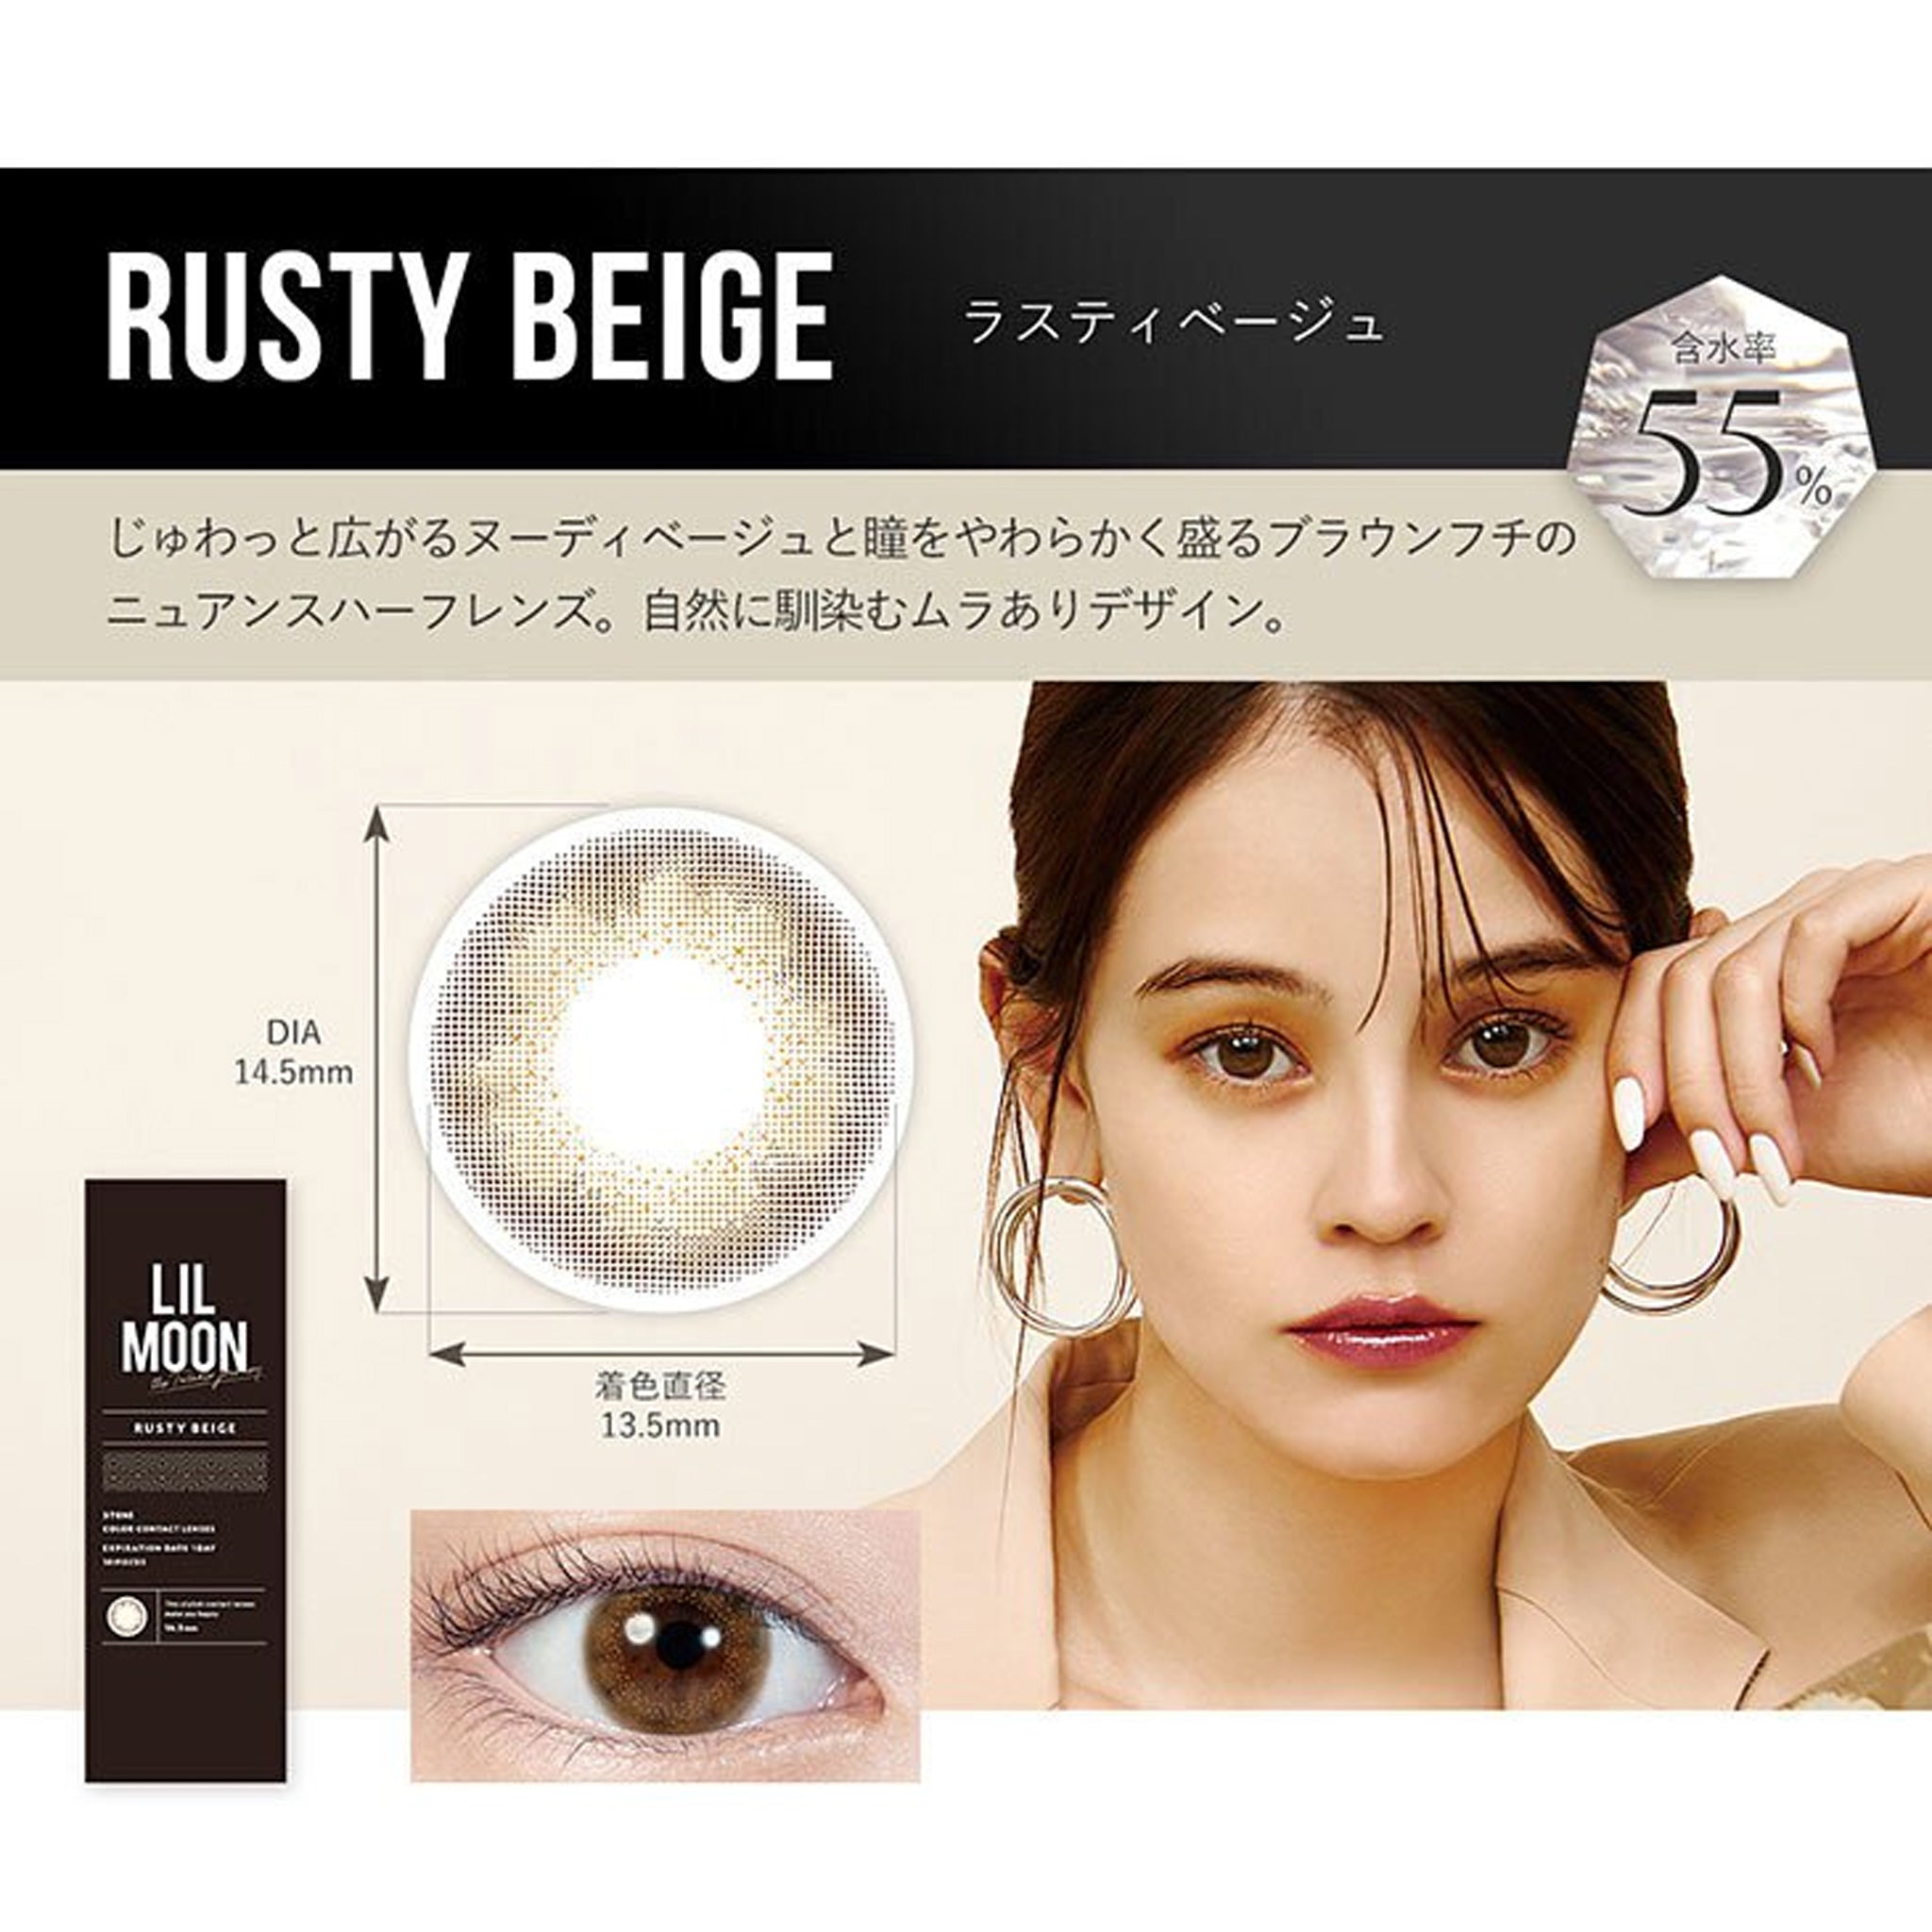 LIL MOON Daily Contact Lenses-Rusty Beige 10lenses